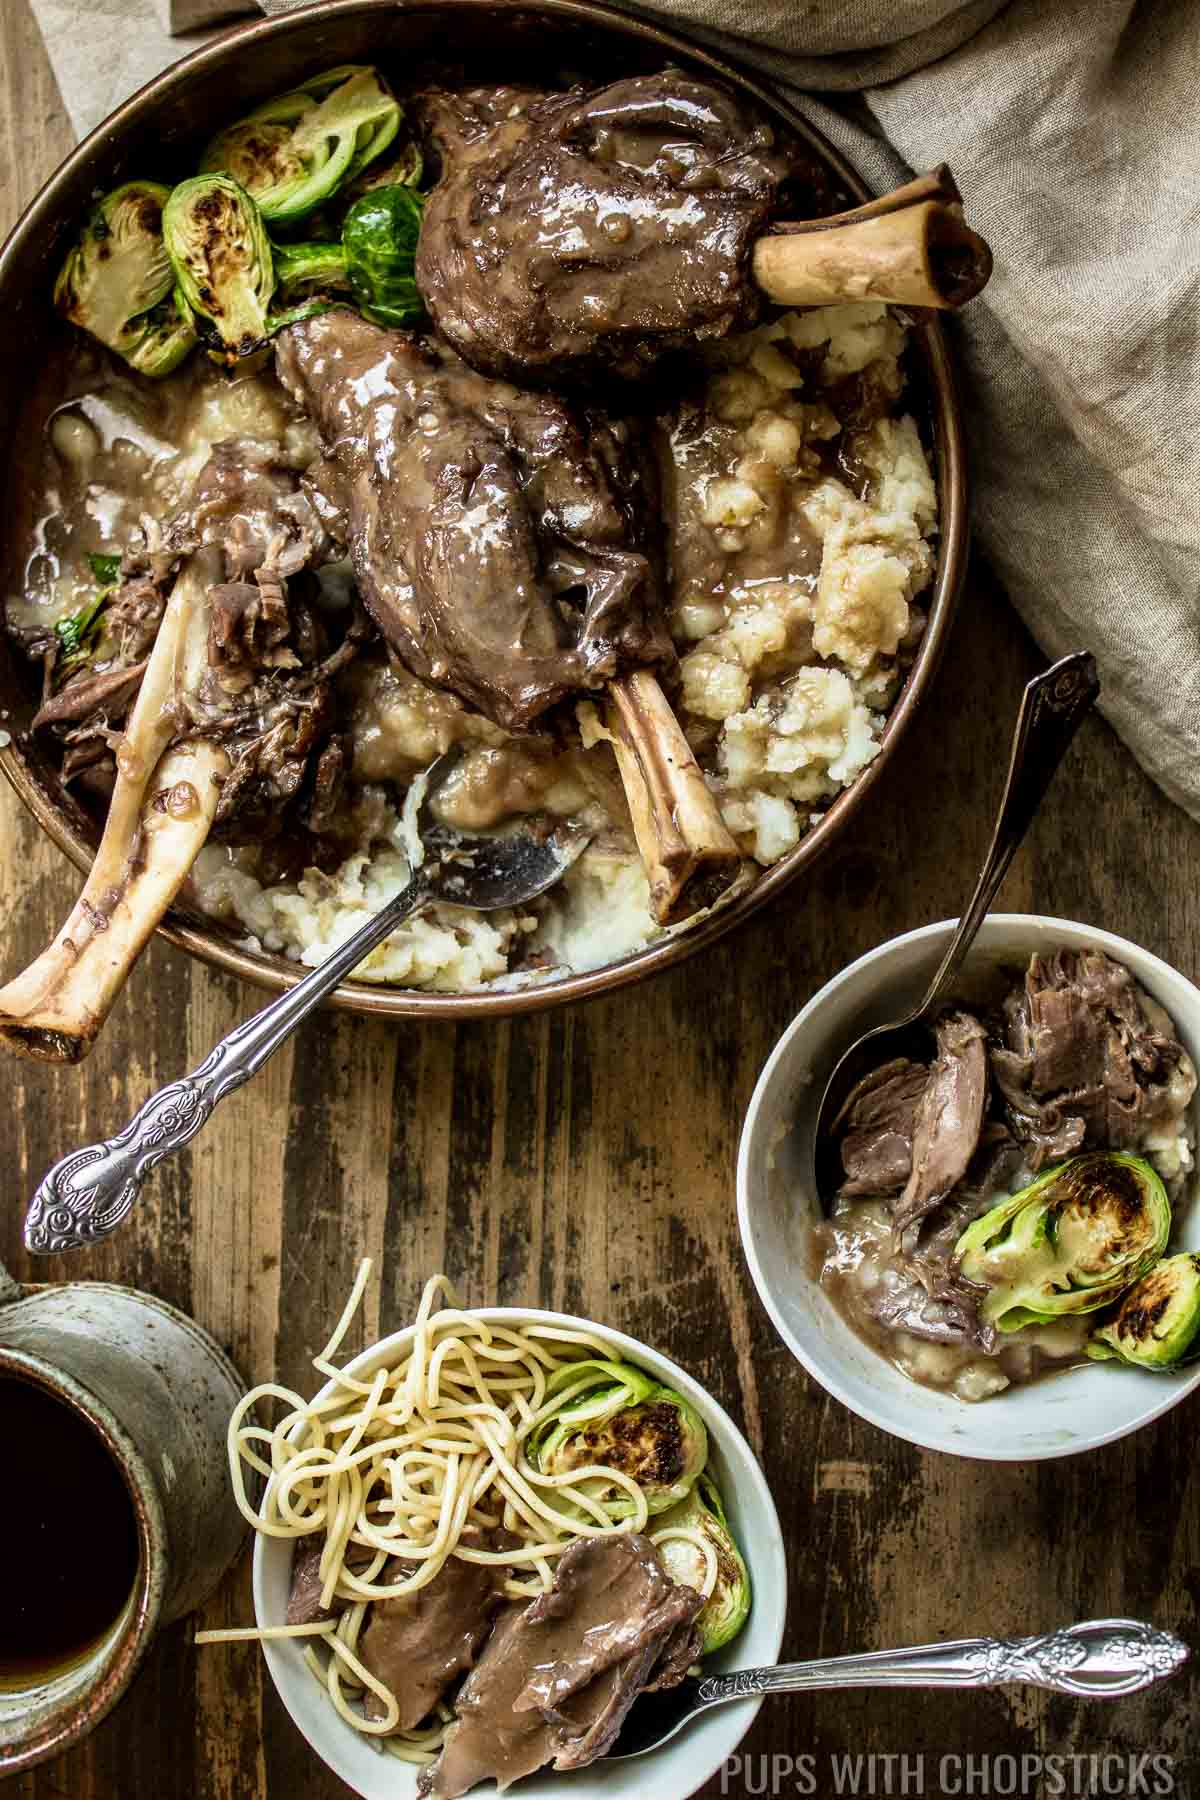 Braised lamb shanks with red wine, and miso served with brussel sprouts and mashed potatoes and pasta